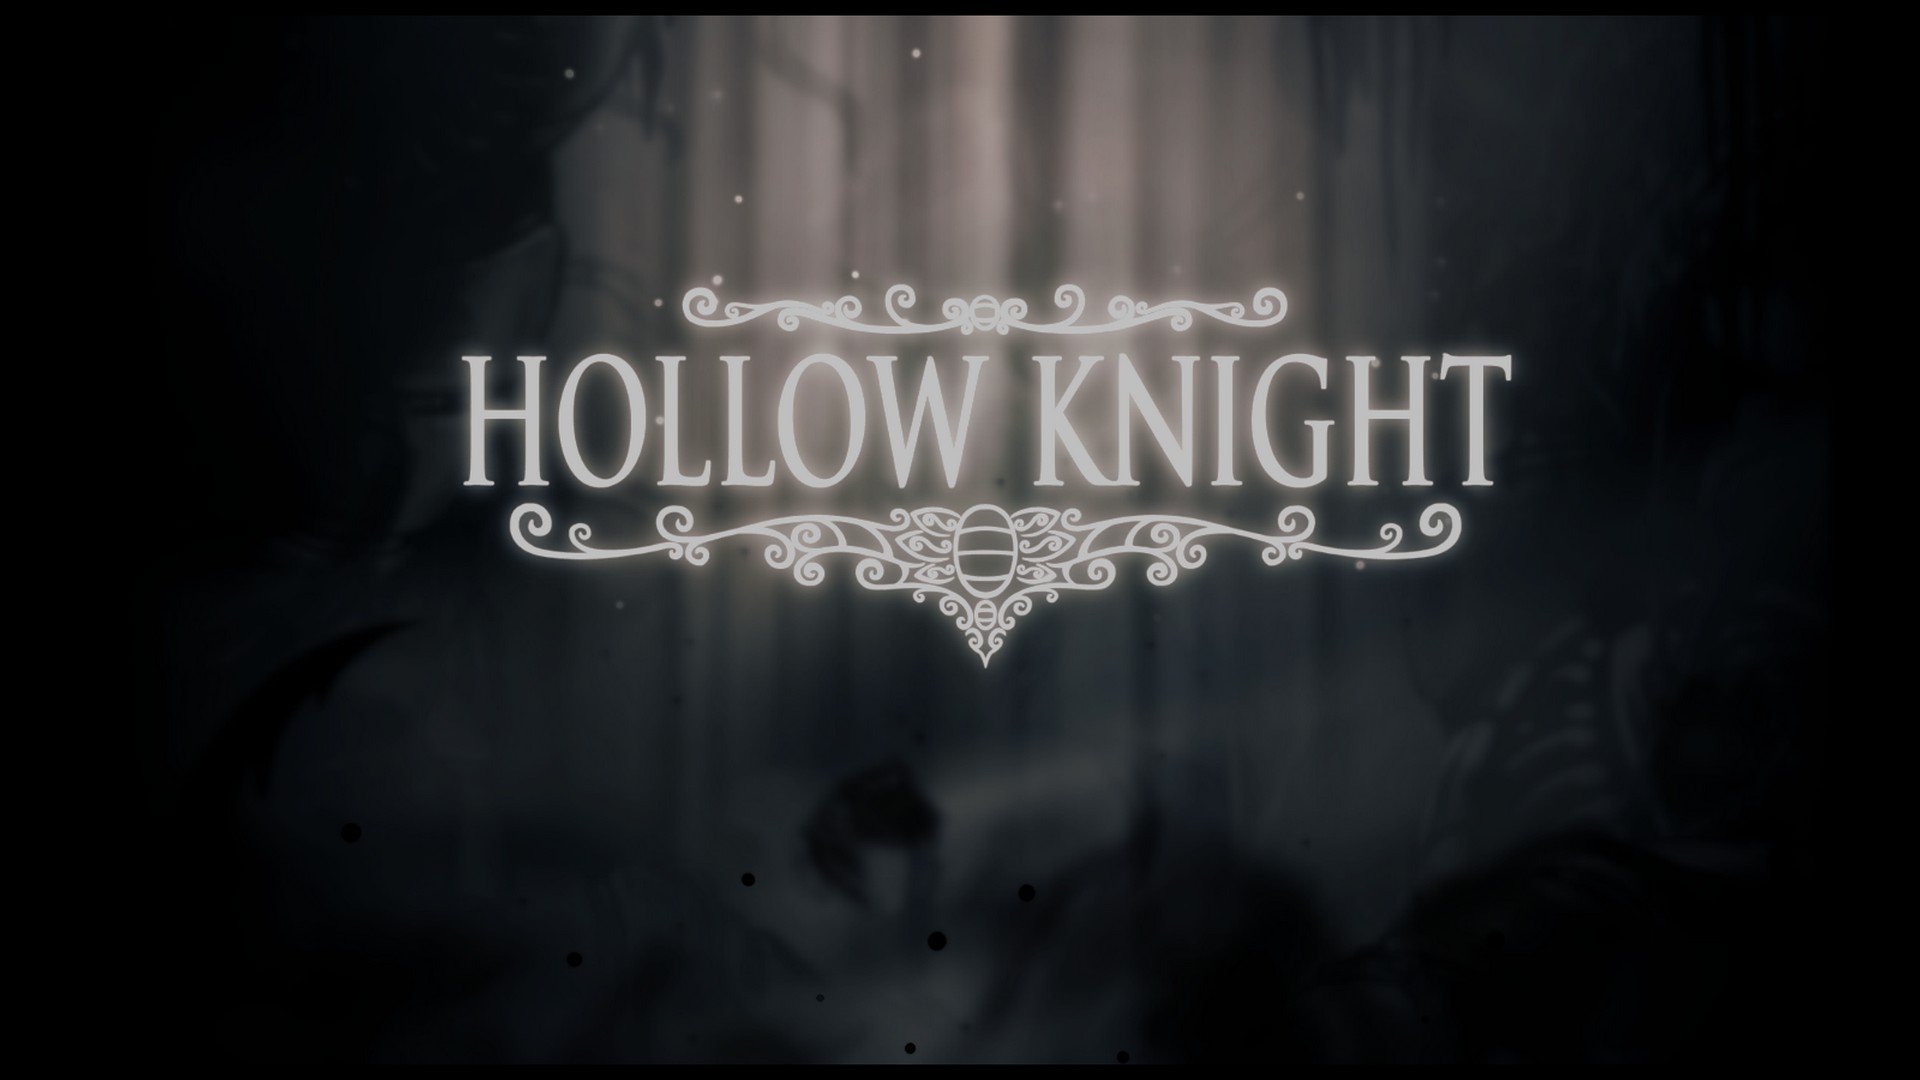 Wallpaper Hollow Knight Gameplay Desktop with high-resolution 1920x1080 pixel. You can use this wallpaper for your Windows and Mac OS computers as well as your Android and iPhone smartphones